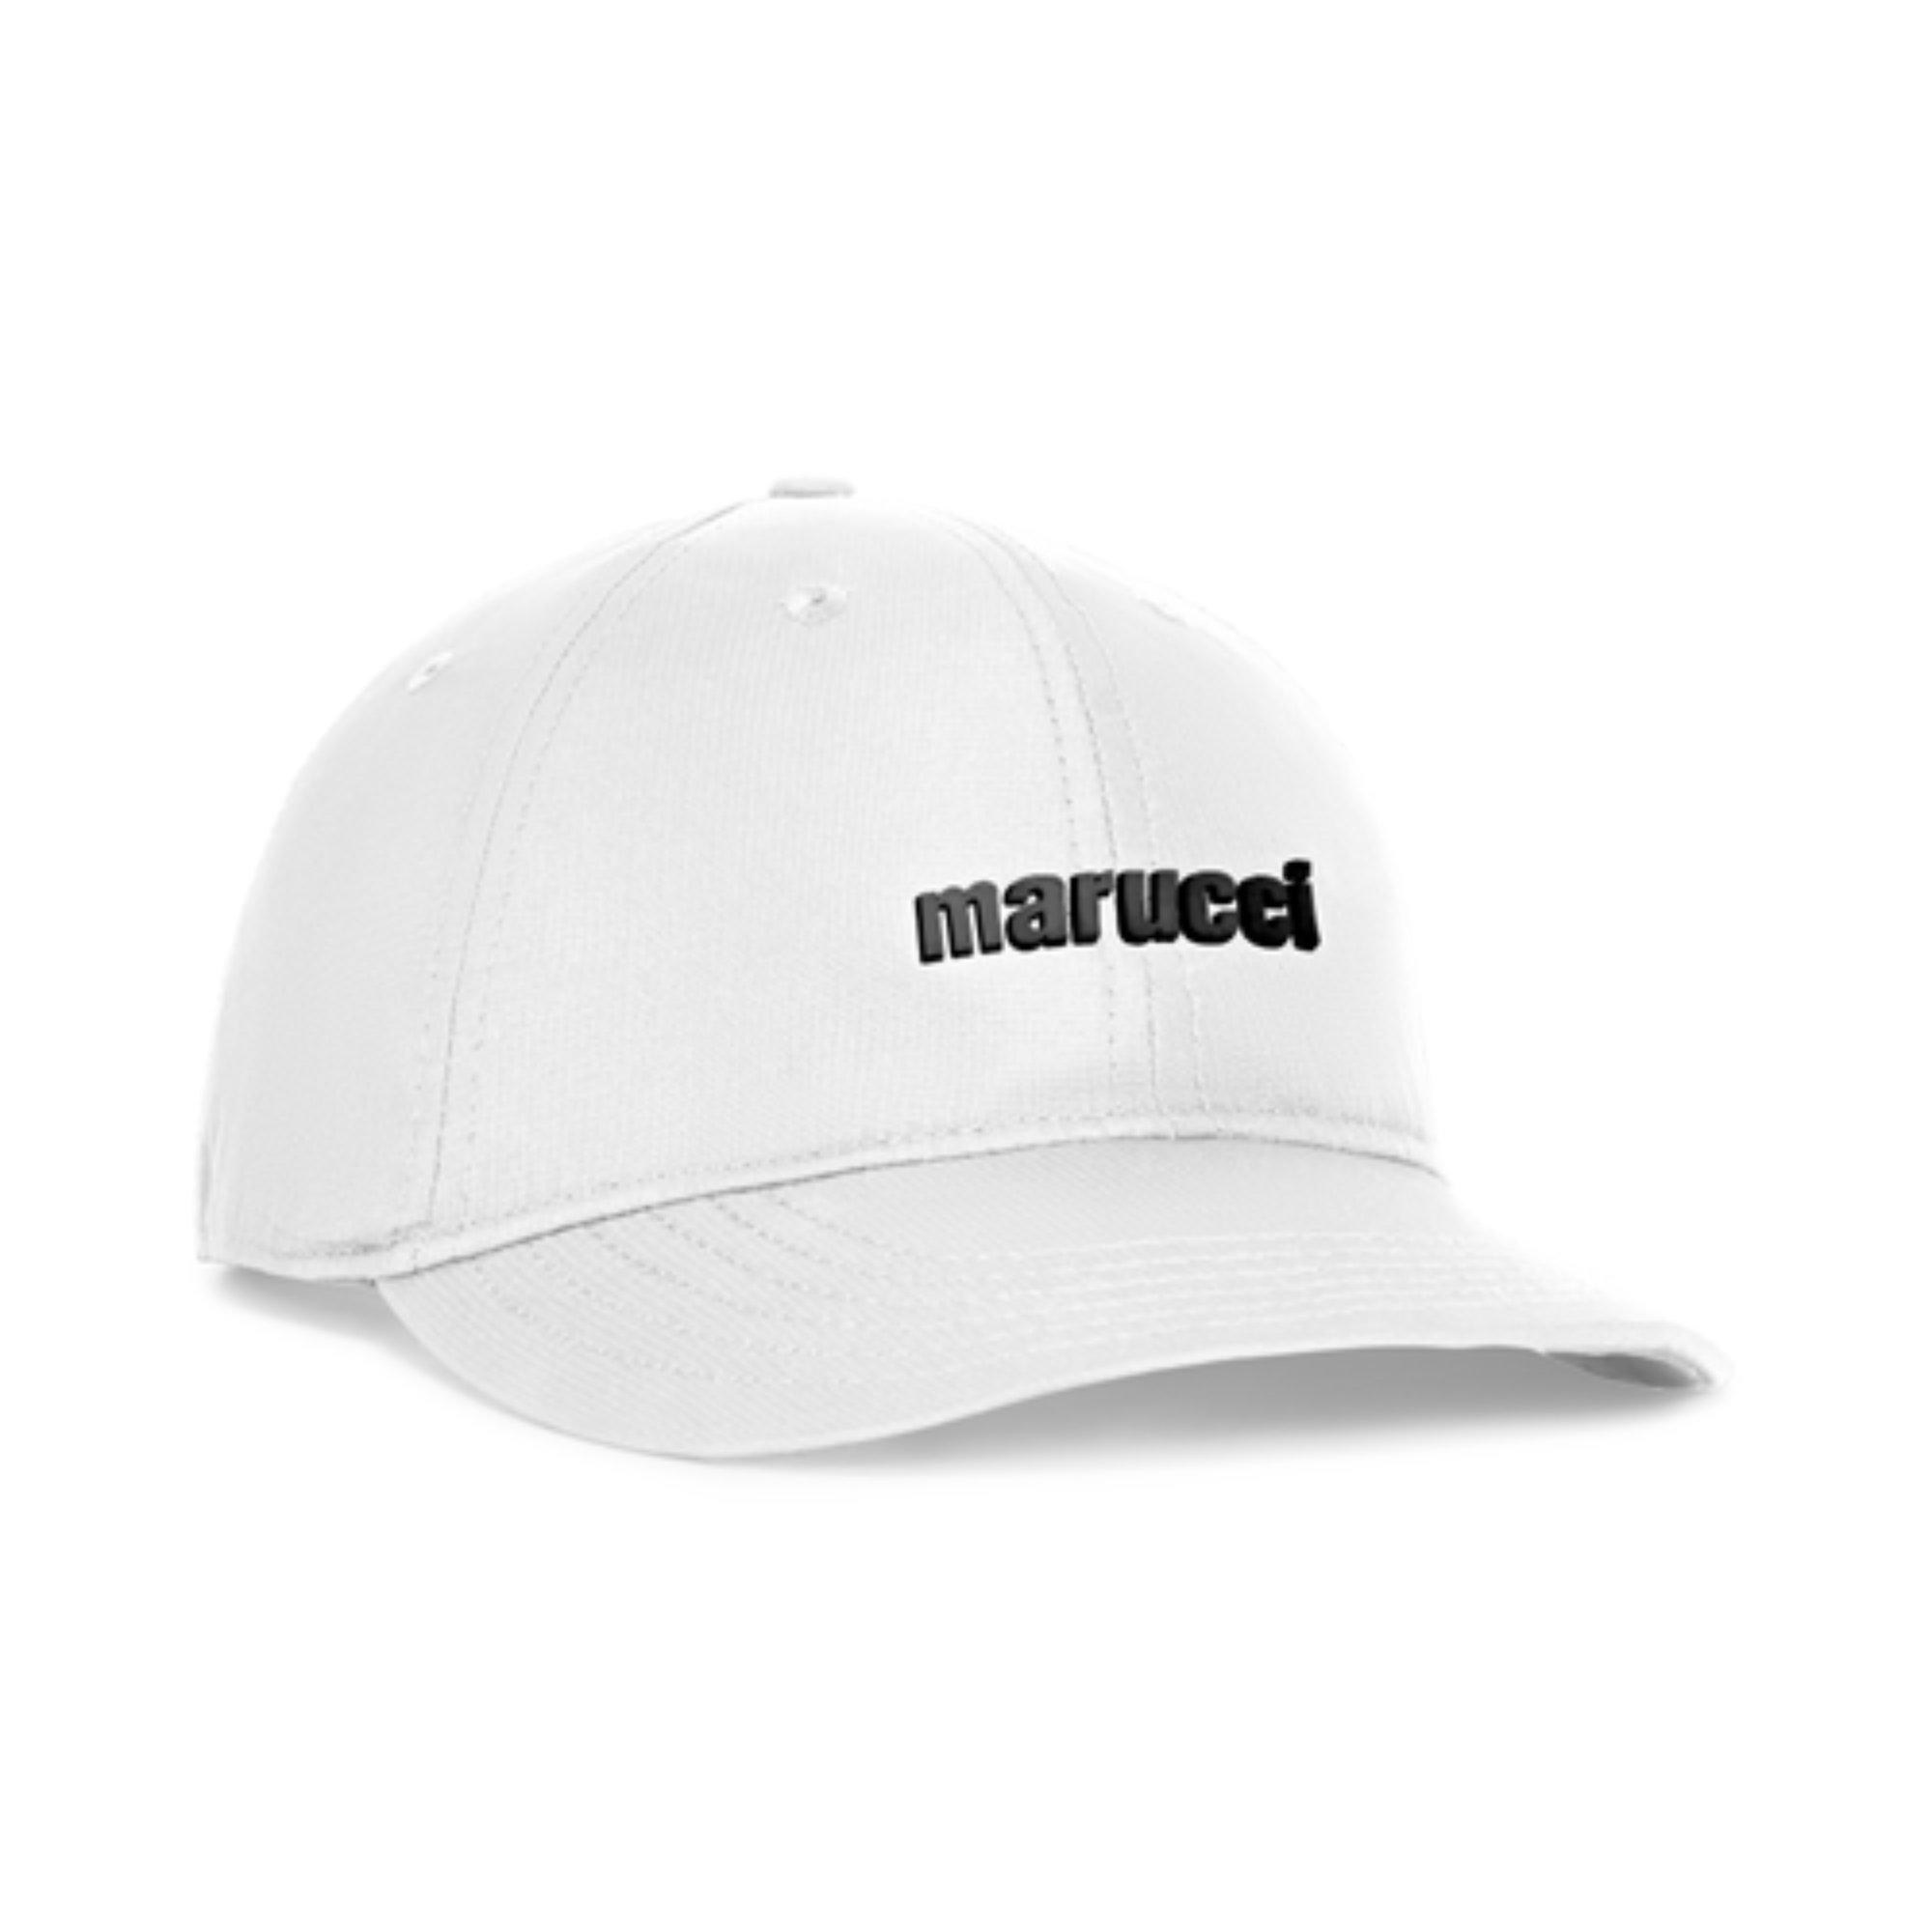 Marucci Adult Unstructured Performance Cap